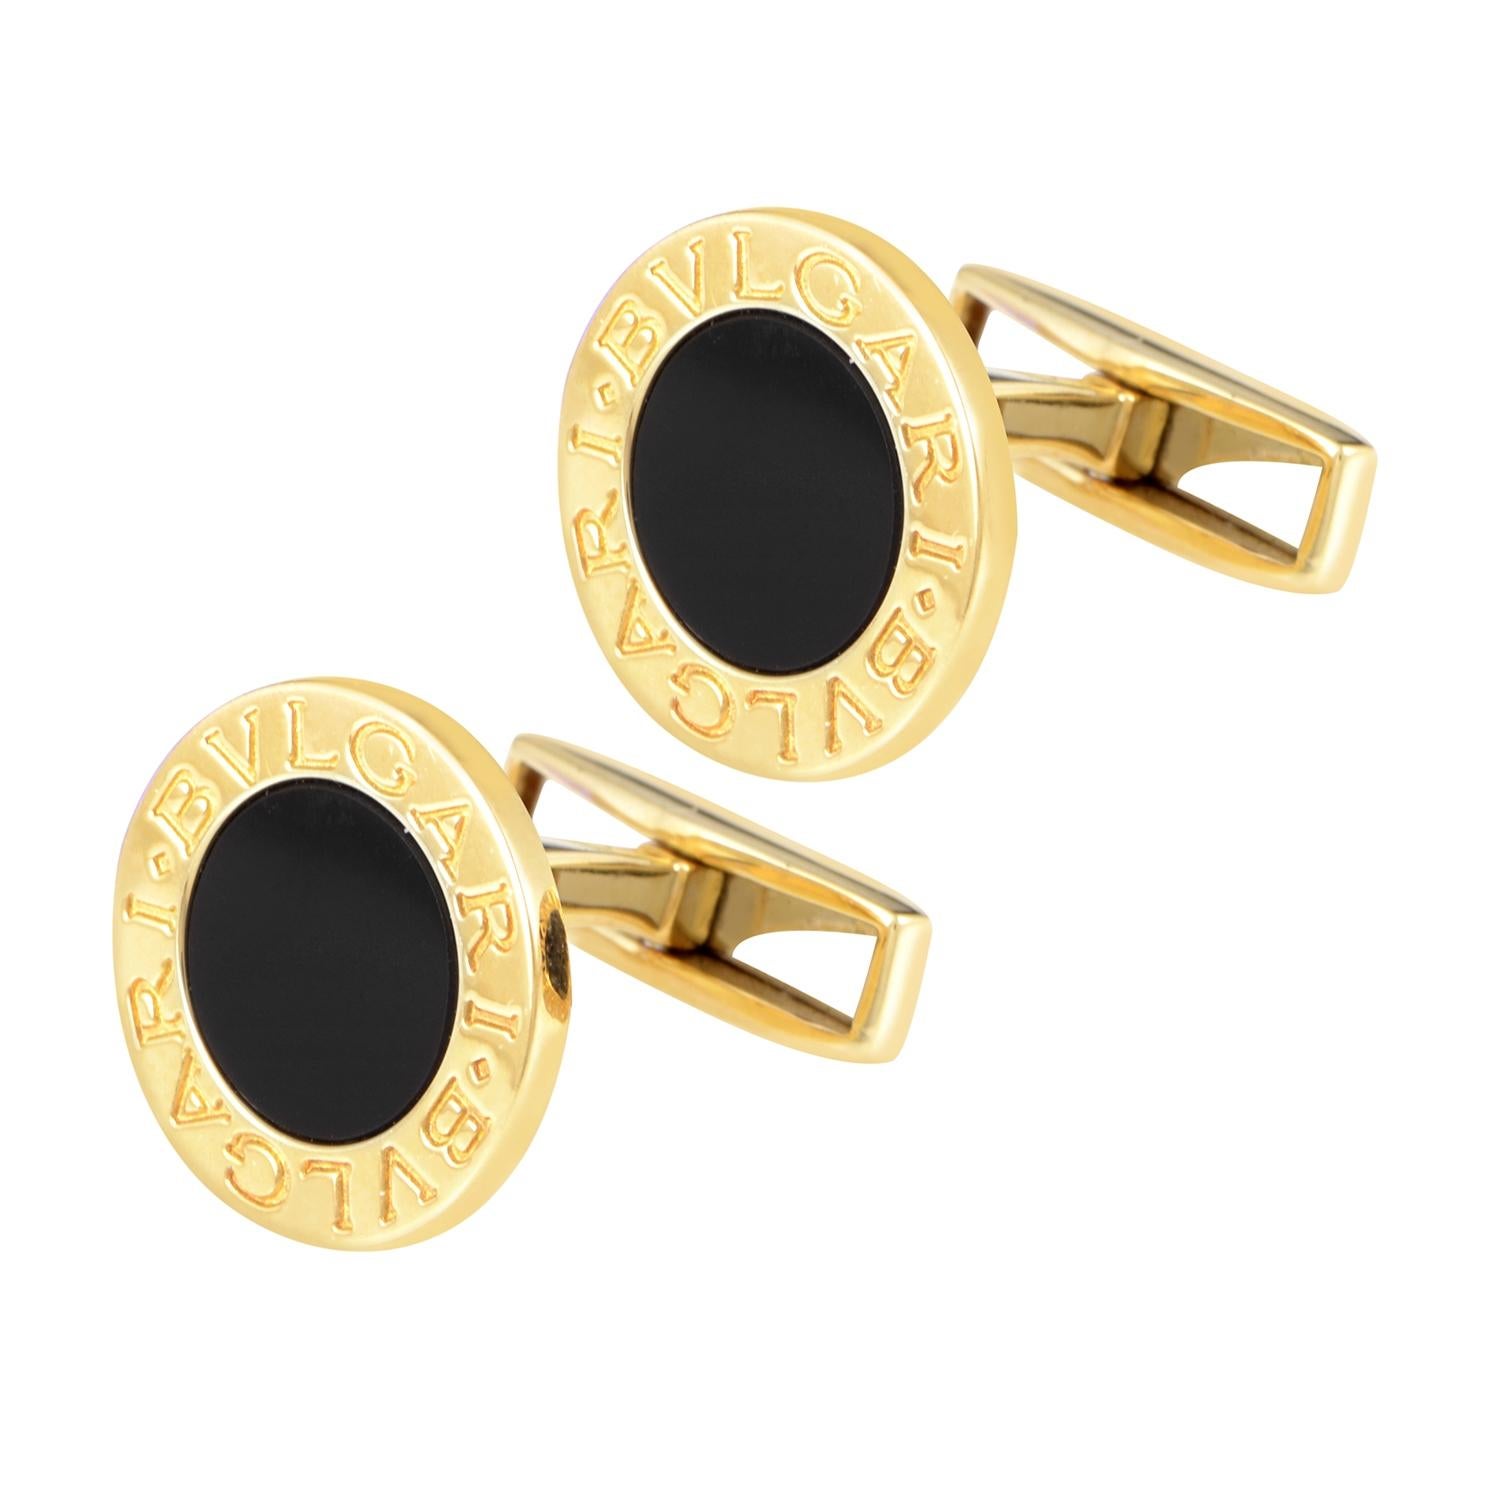 A combination that is both striking and elegant, the tasteful blend of pleasing 18K yellow gold and captivating onyx produces a stunning look in this outstanding pair of cufflinks from Bvlgari.